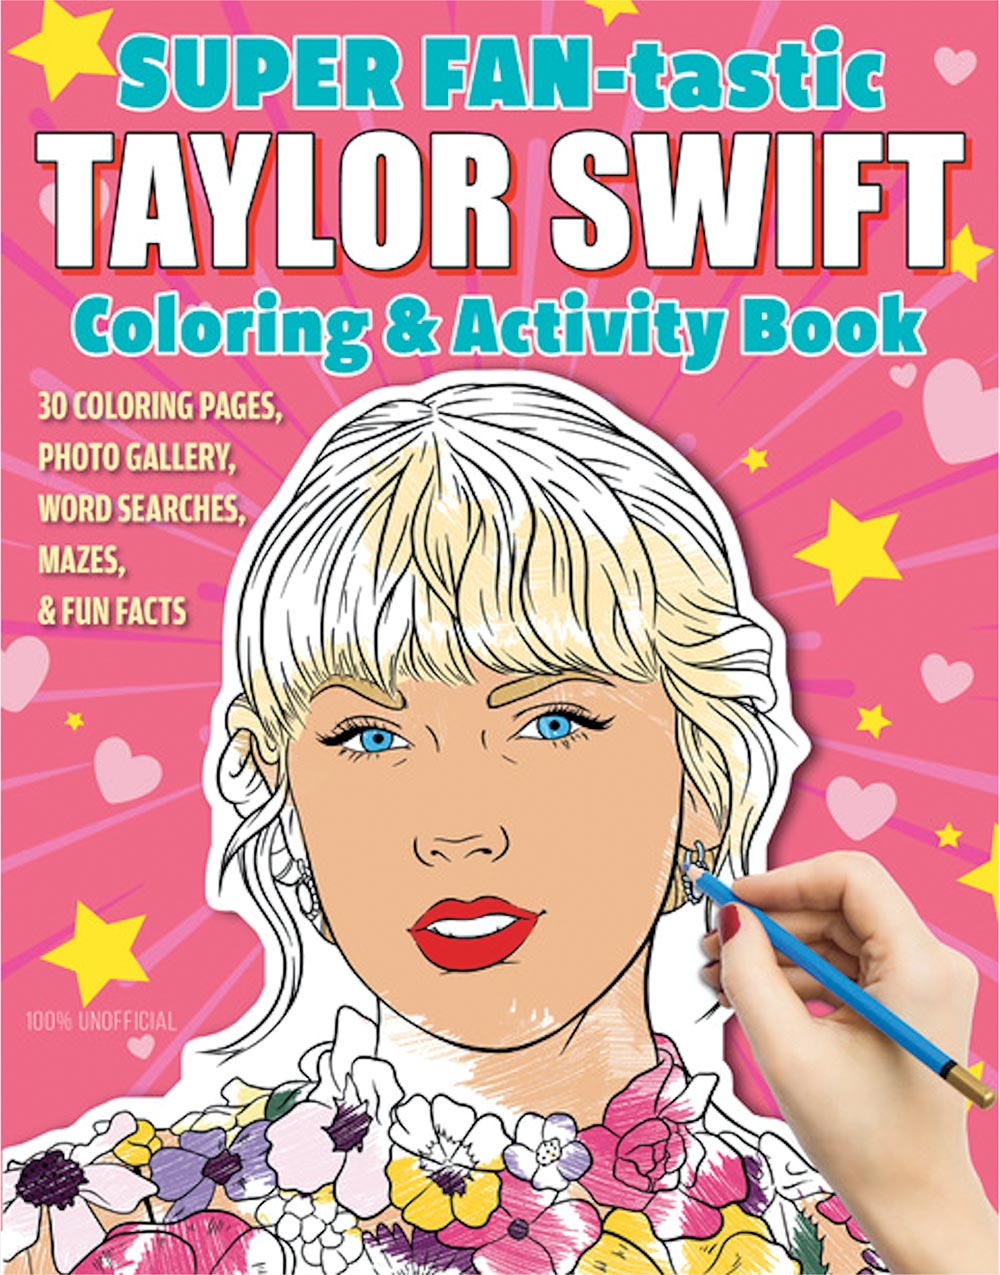 Super FAN-tastic Taylor Swift Coloring and Activity Book